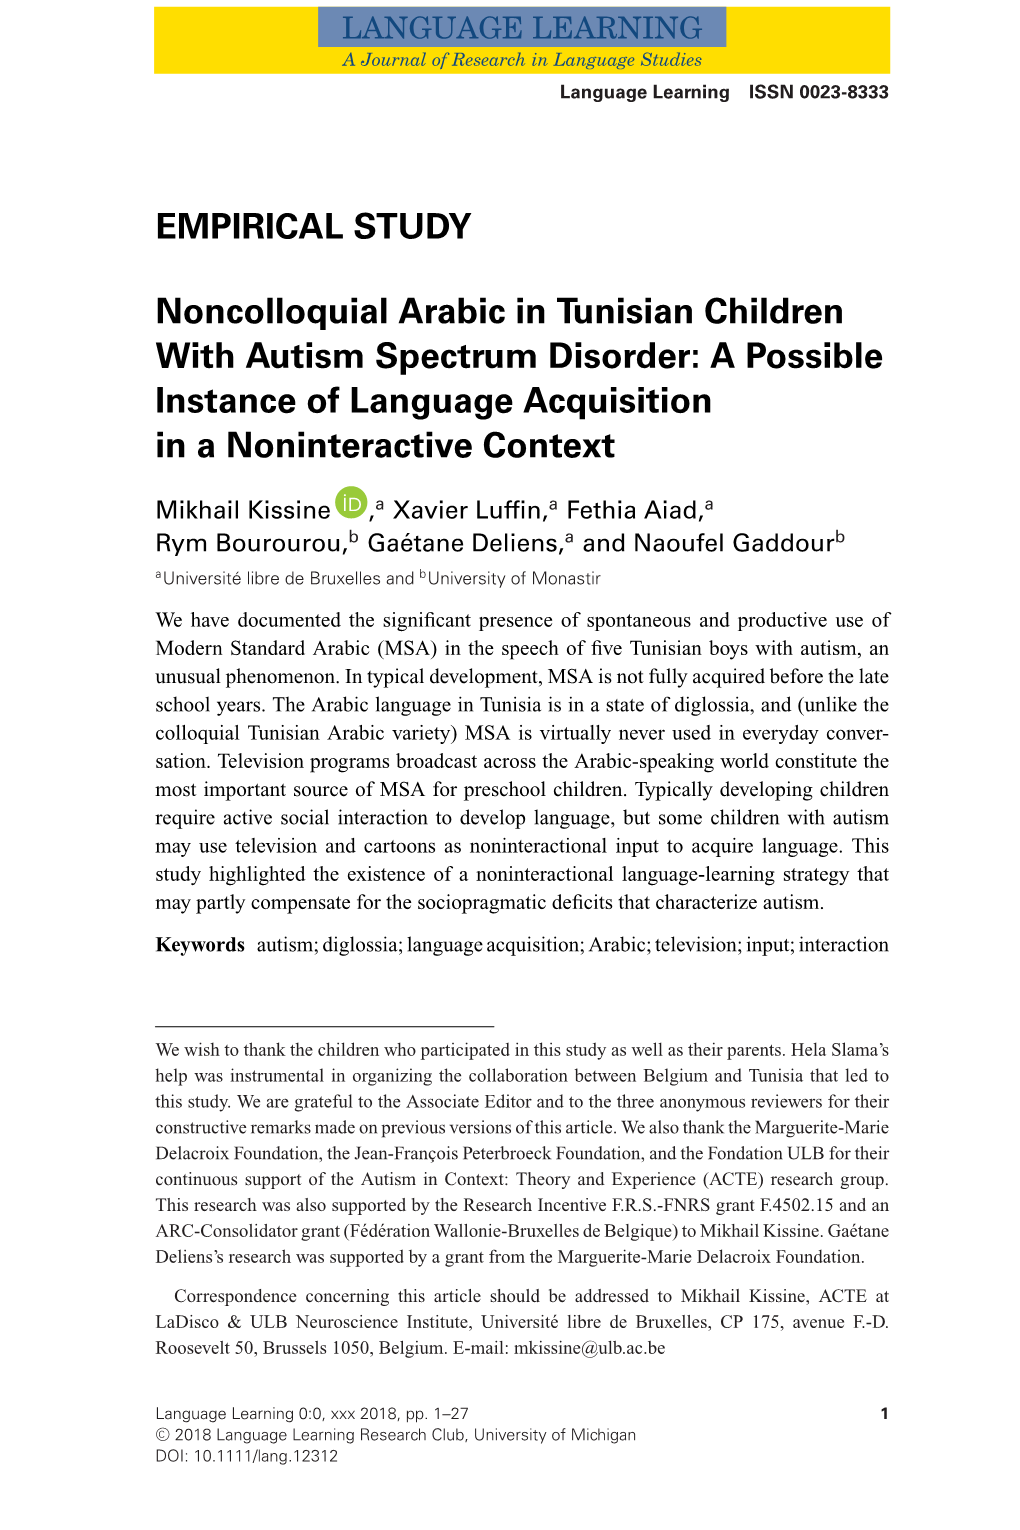 Noncolloquial Arabic in Tunisian Children with Autism Spectrum Disorder: a Possible Instance of Language Acquisition in a Noninteractive Context